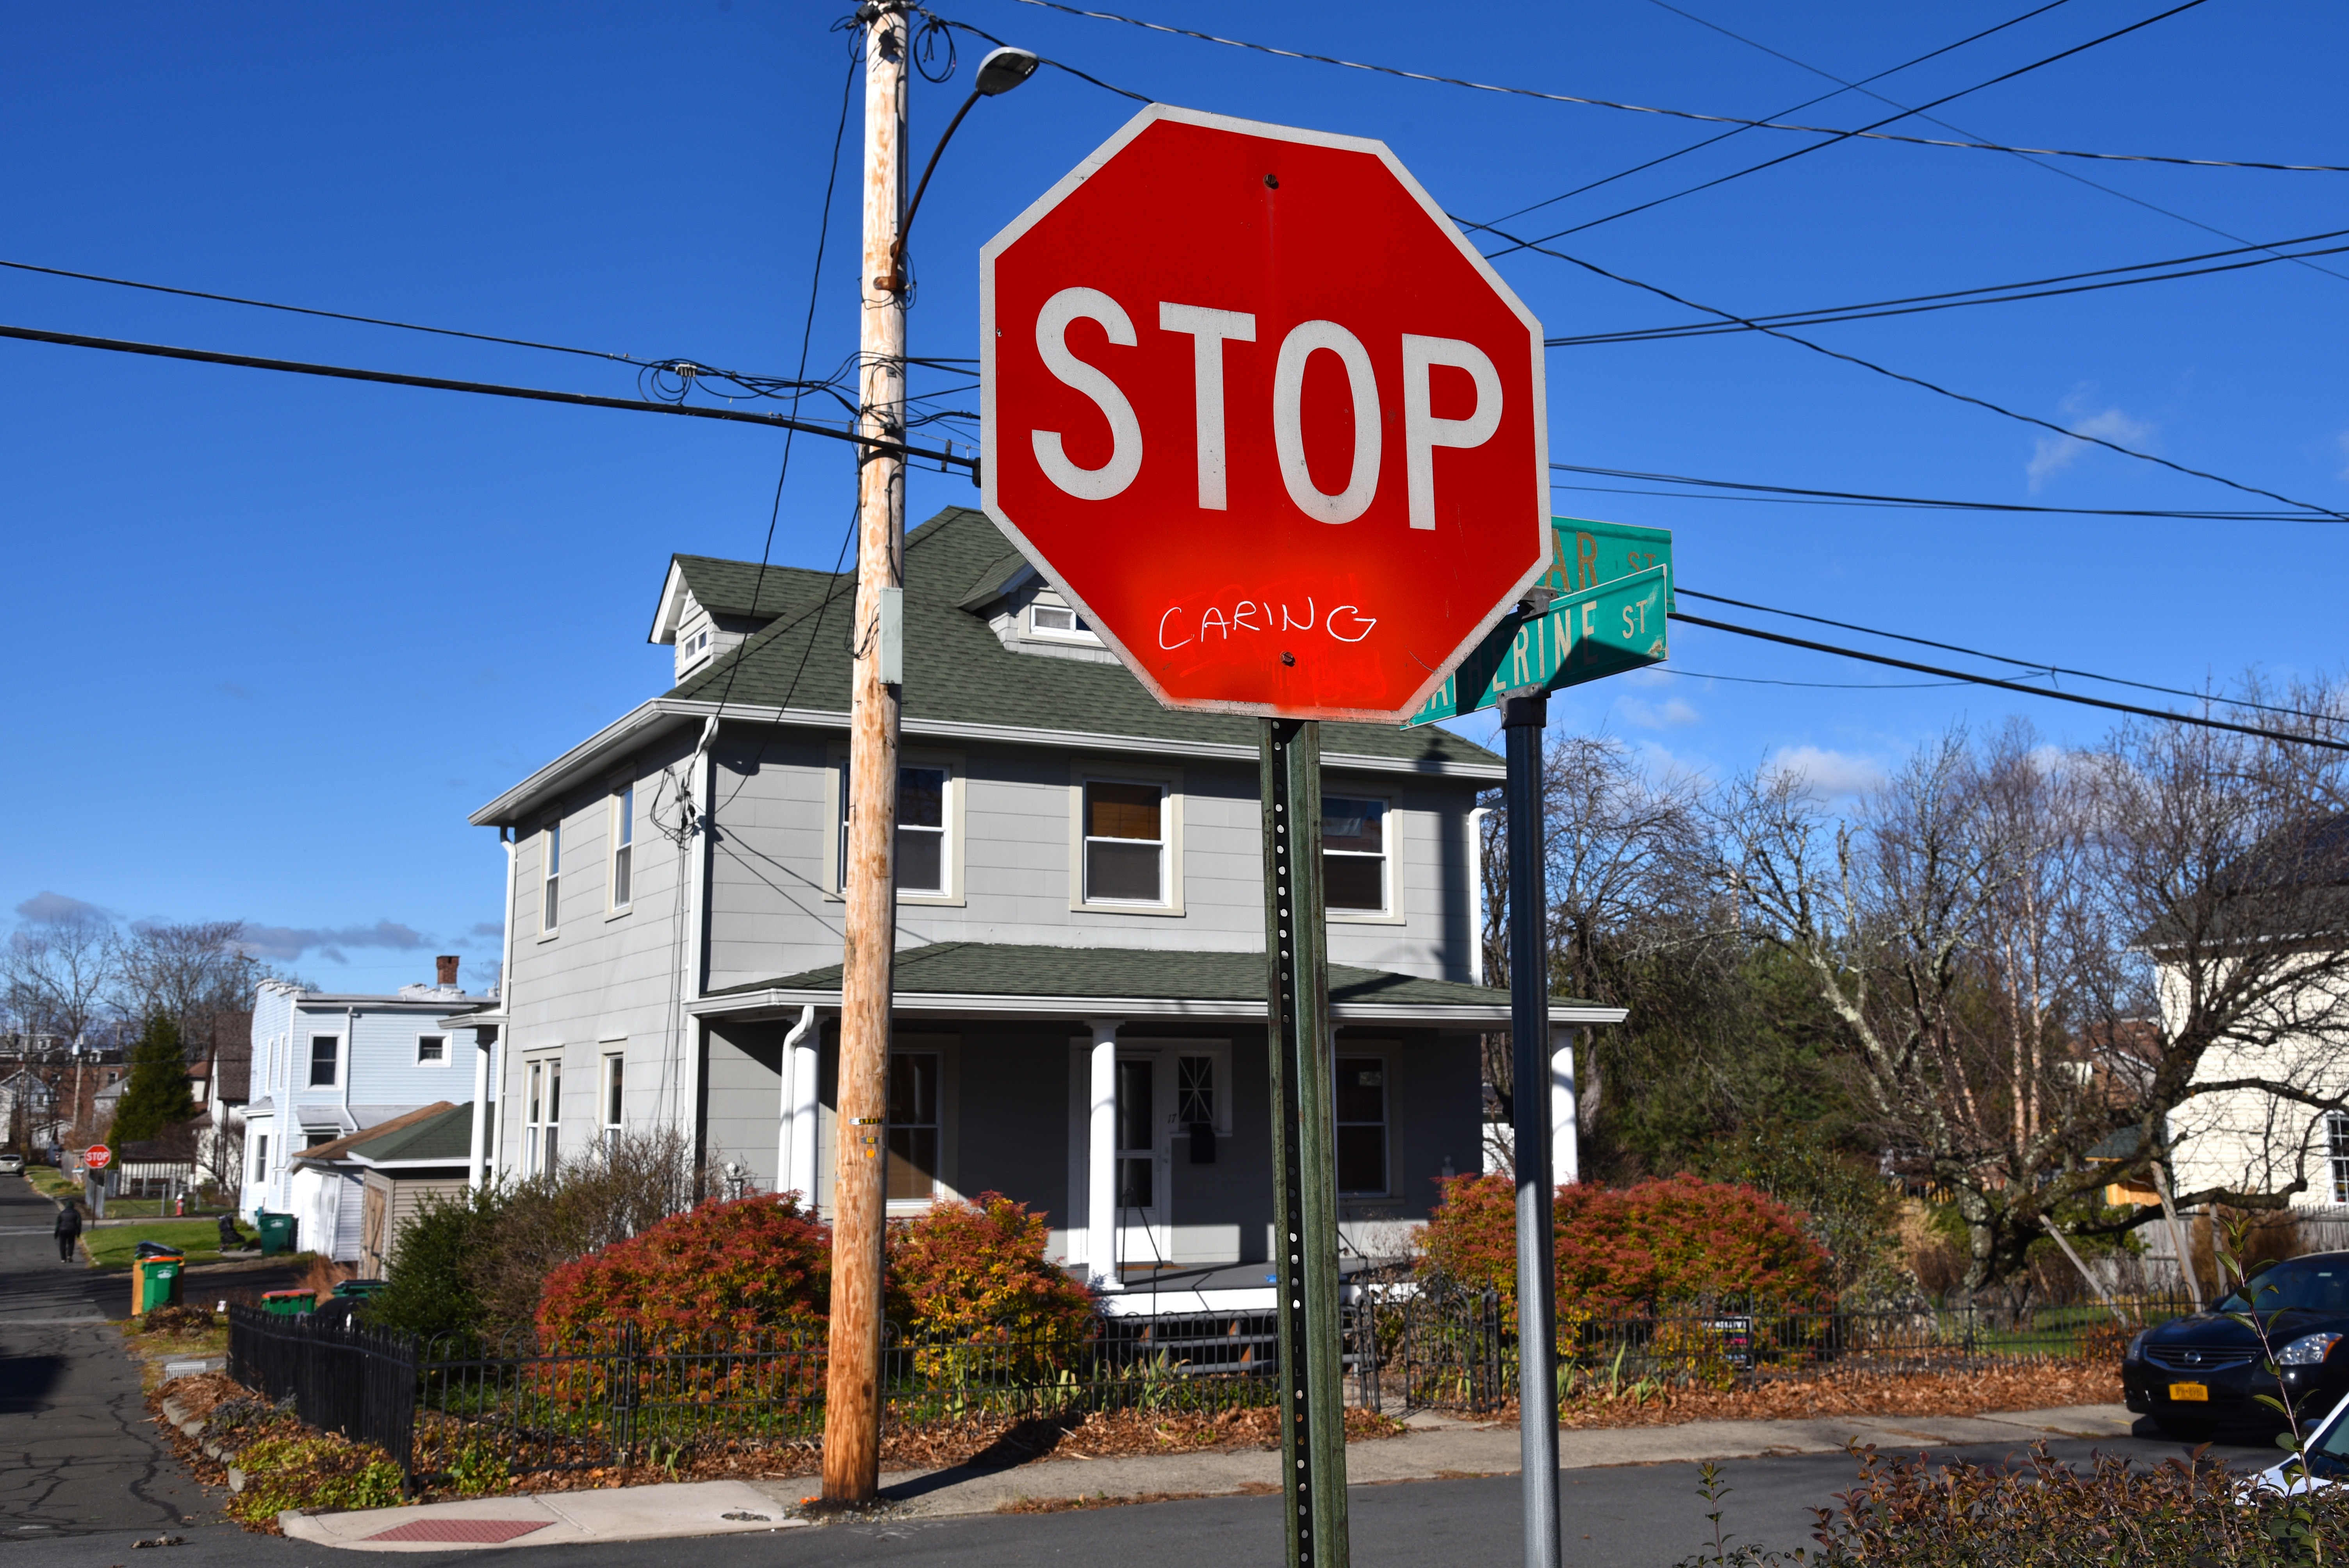 Stop sign with hand-written 'caring' under the word stop.